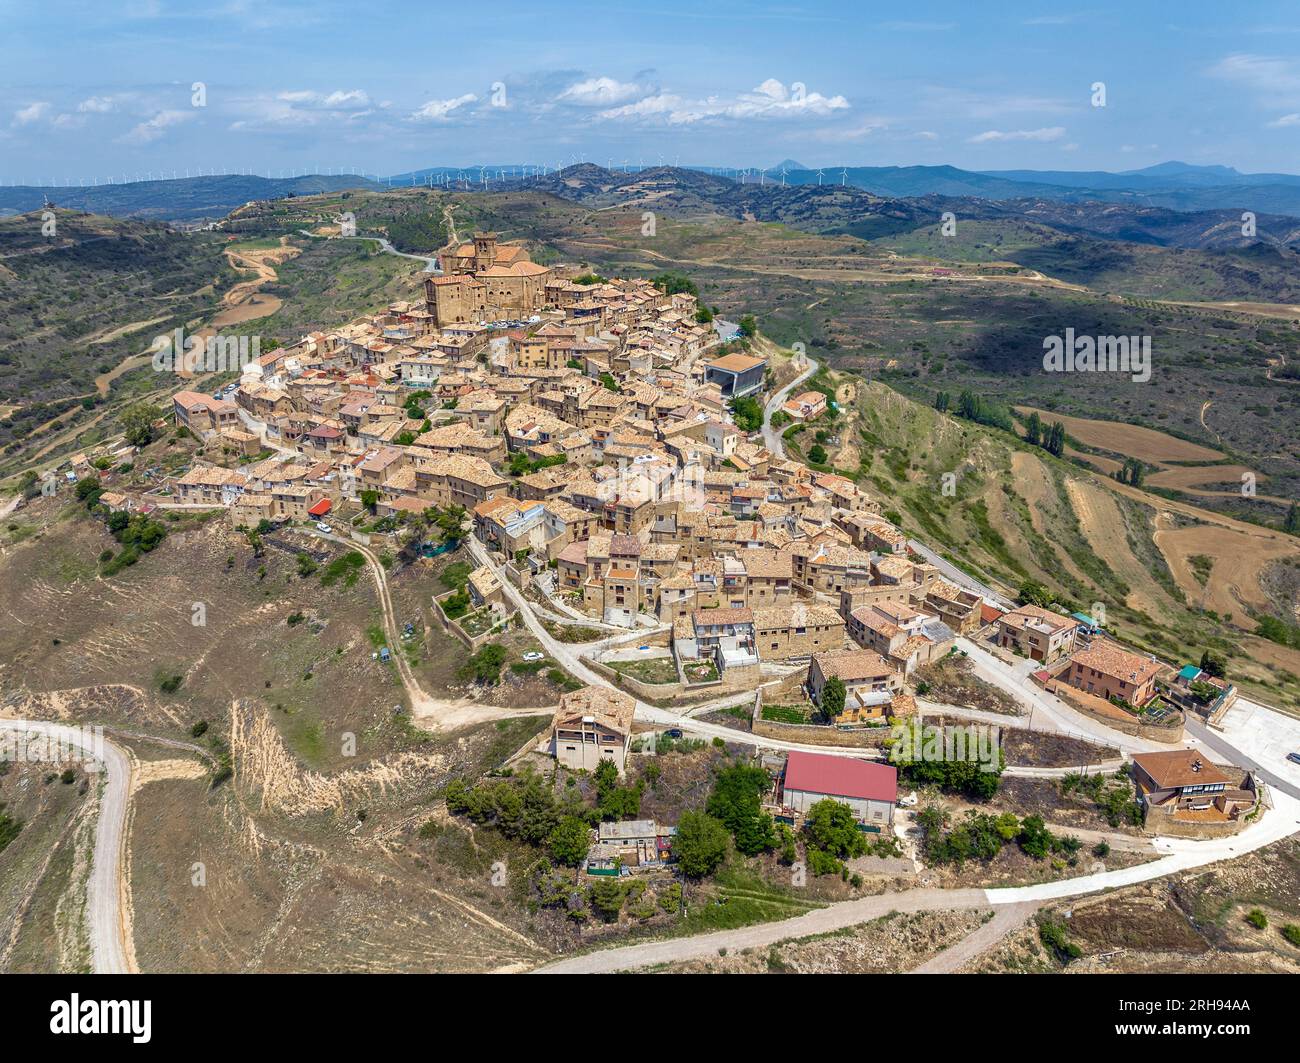 Aerial view of the hilltop medieval village of Ujue in Navarra, northern Spain on ancient pilgrim route Camino de Santiago or Way of St James. Nominat Stock Photo